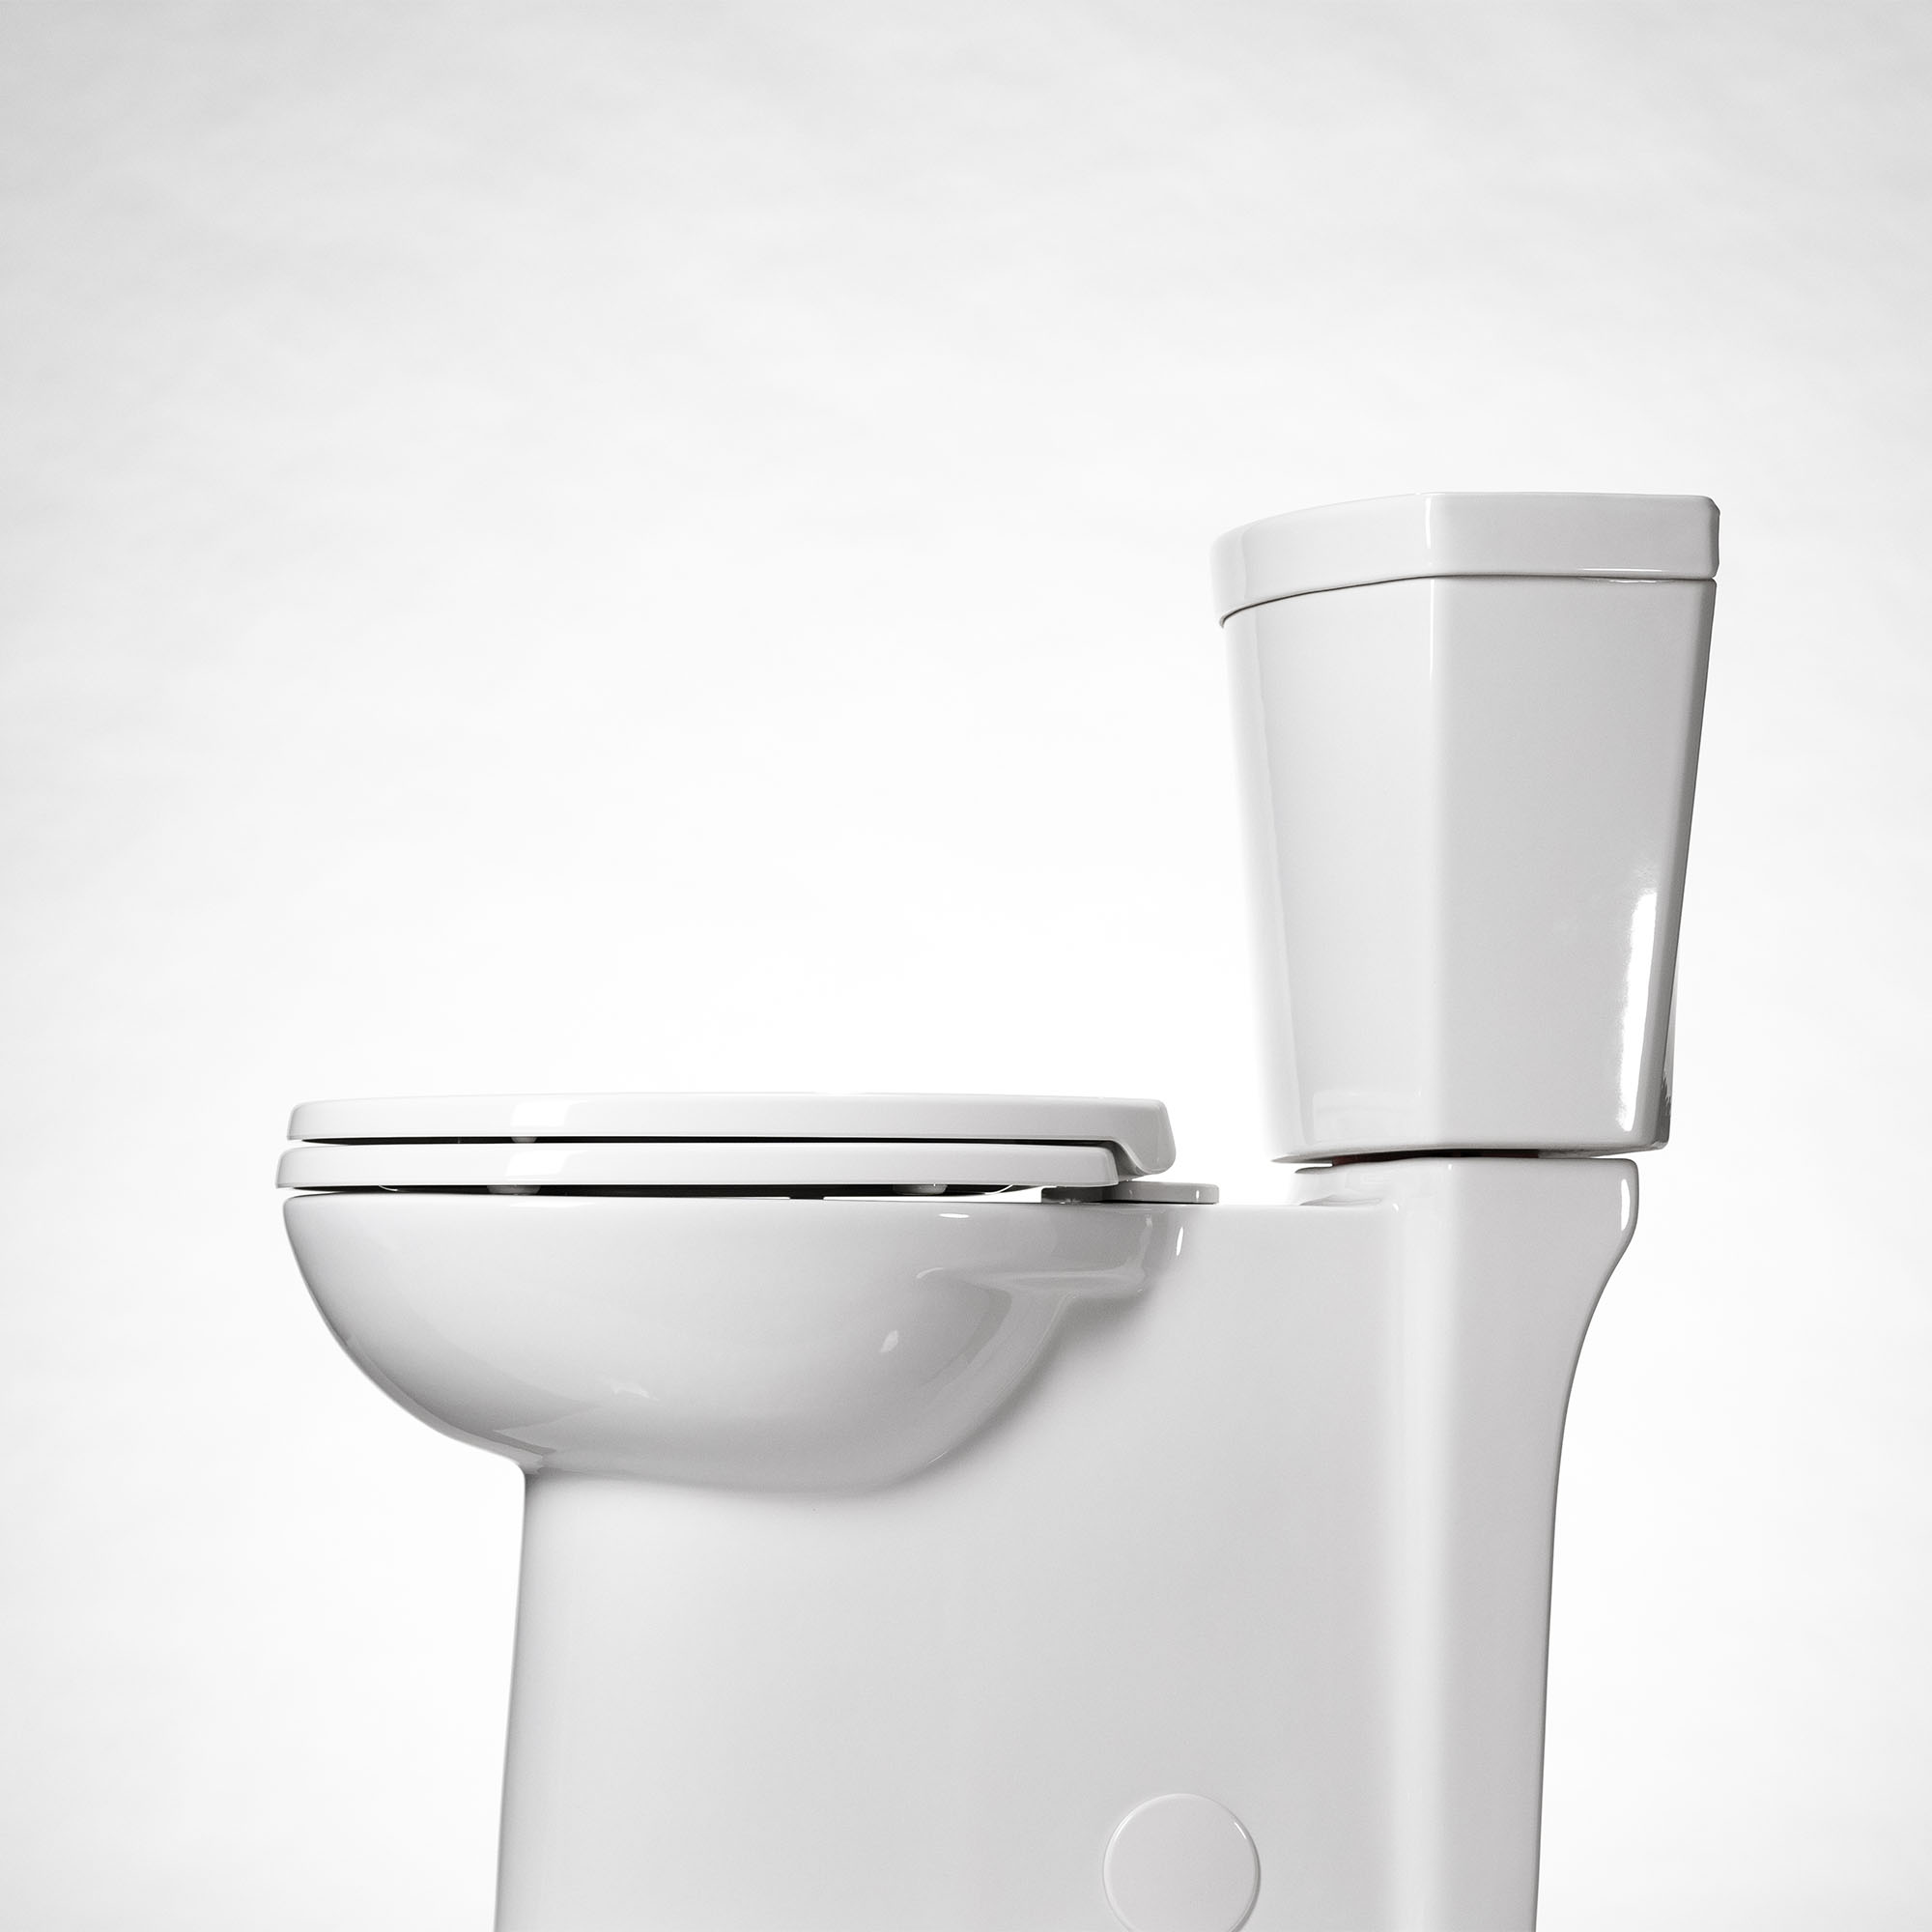 Studio Touchless Skirted Two-Piece 1.28 gpf/4.8 Lpf Chair Height Elongated Toilet with Seat